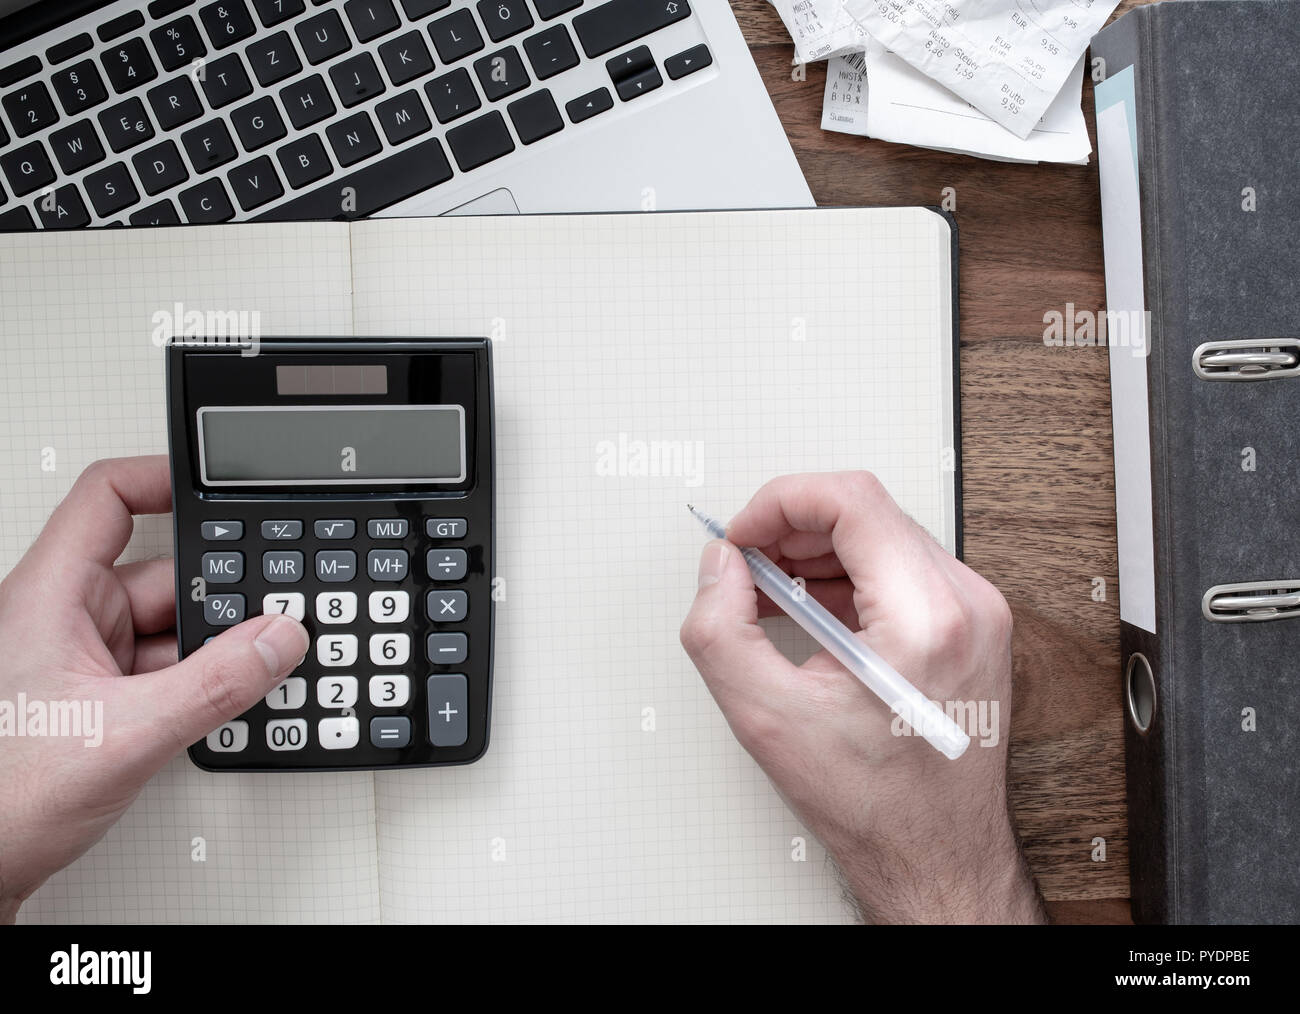 top view of man using calculator on desk with folder, receipts or bills and  laptop Stock Photo - Alamy